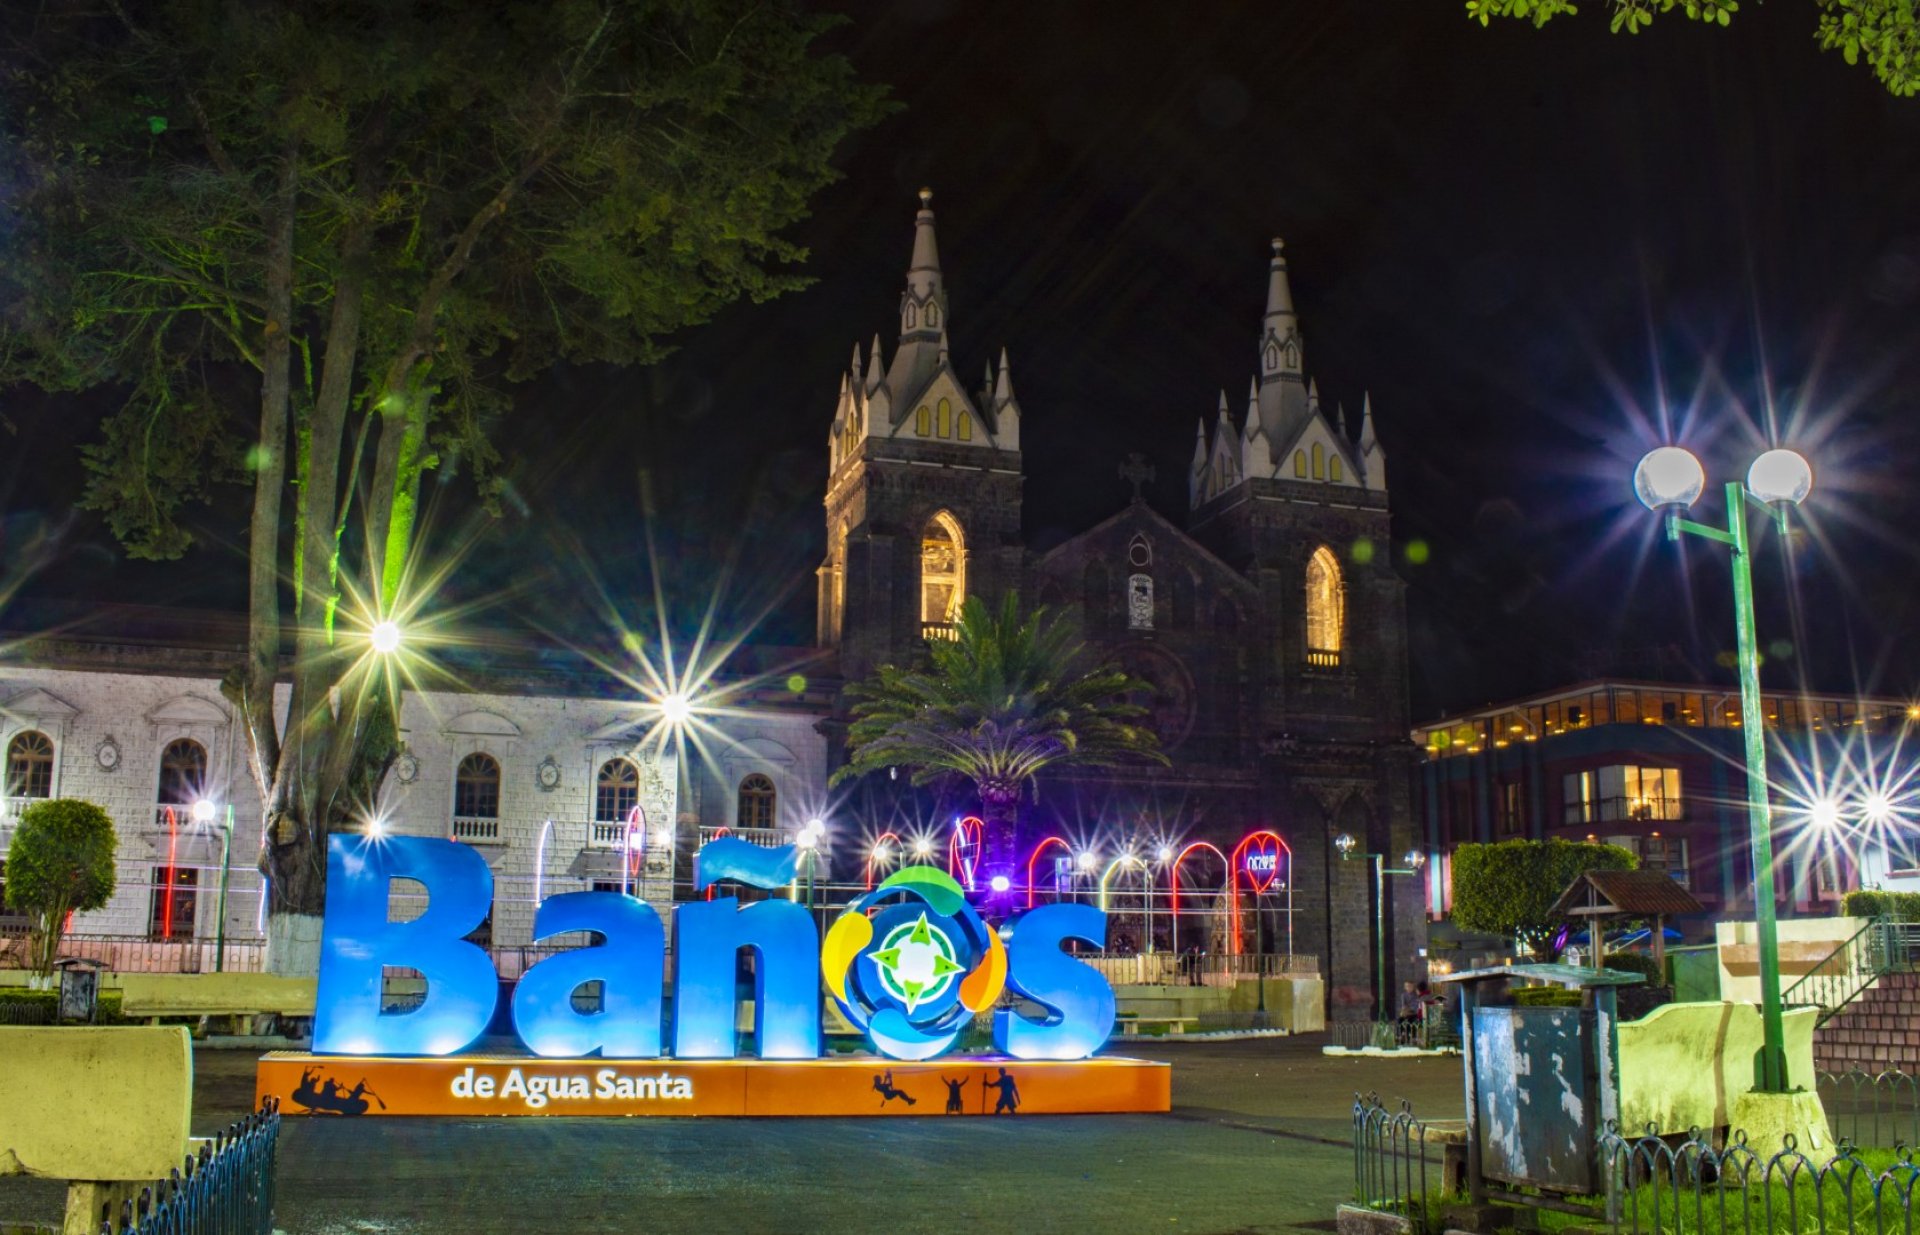 How to get to Baños de Agua Santa from Quito, Guayaquil, Cuenca and Montañita